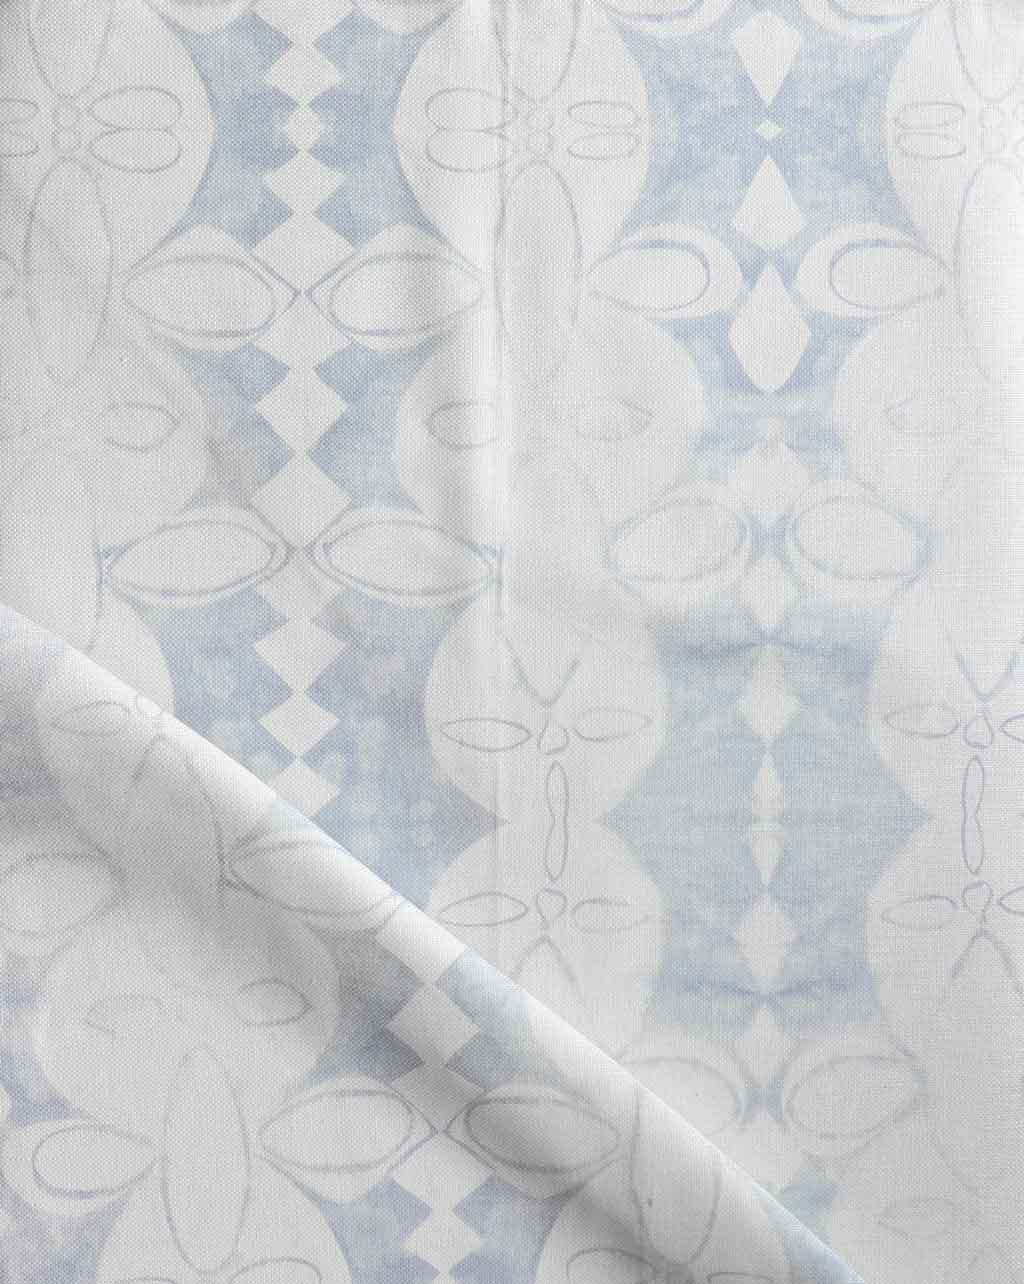 A Coconut Chine Fabric||Mist with a design on it.